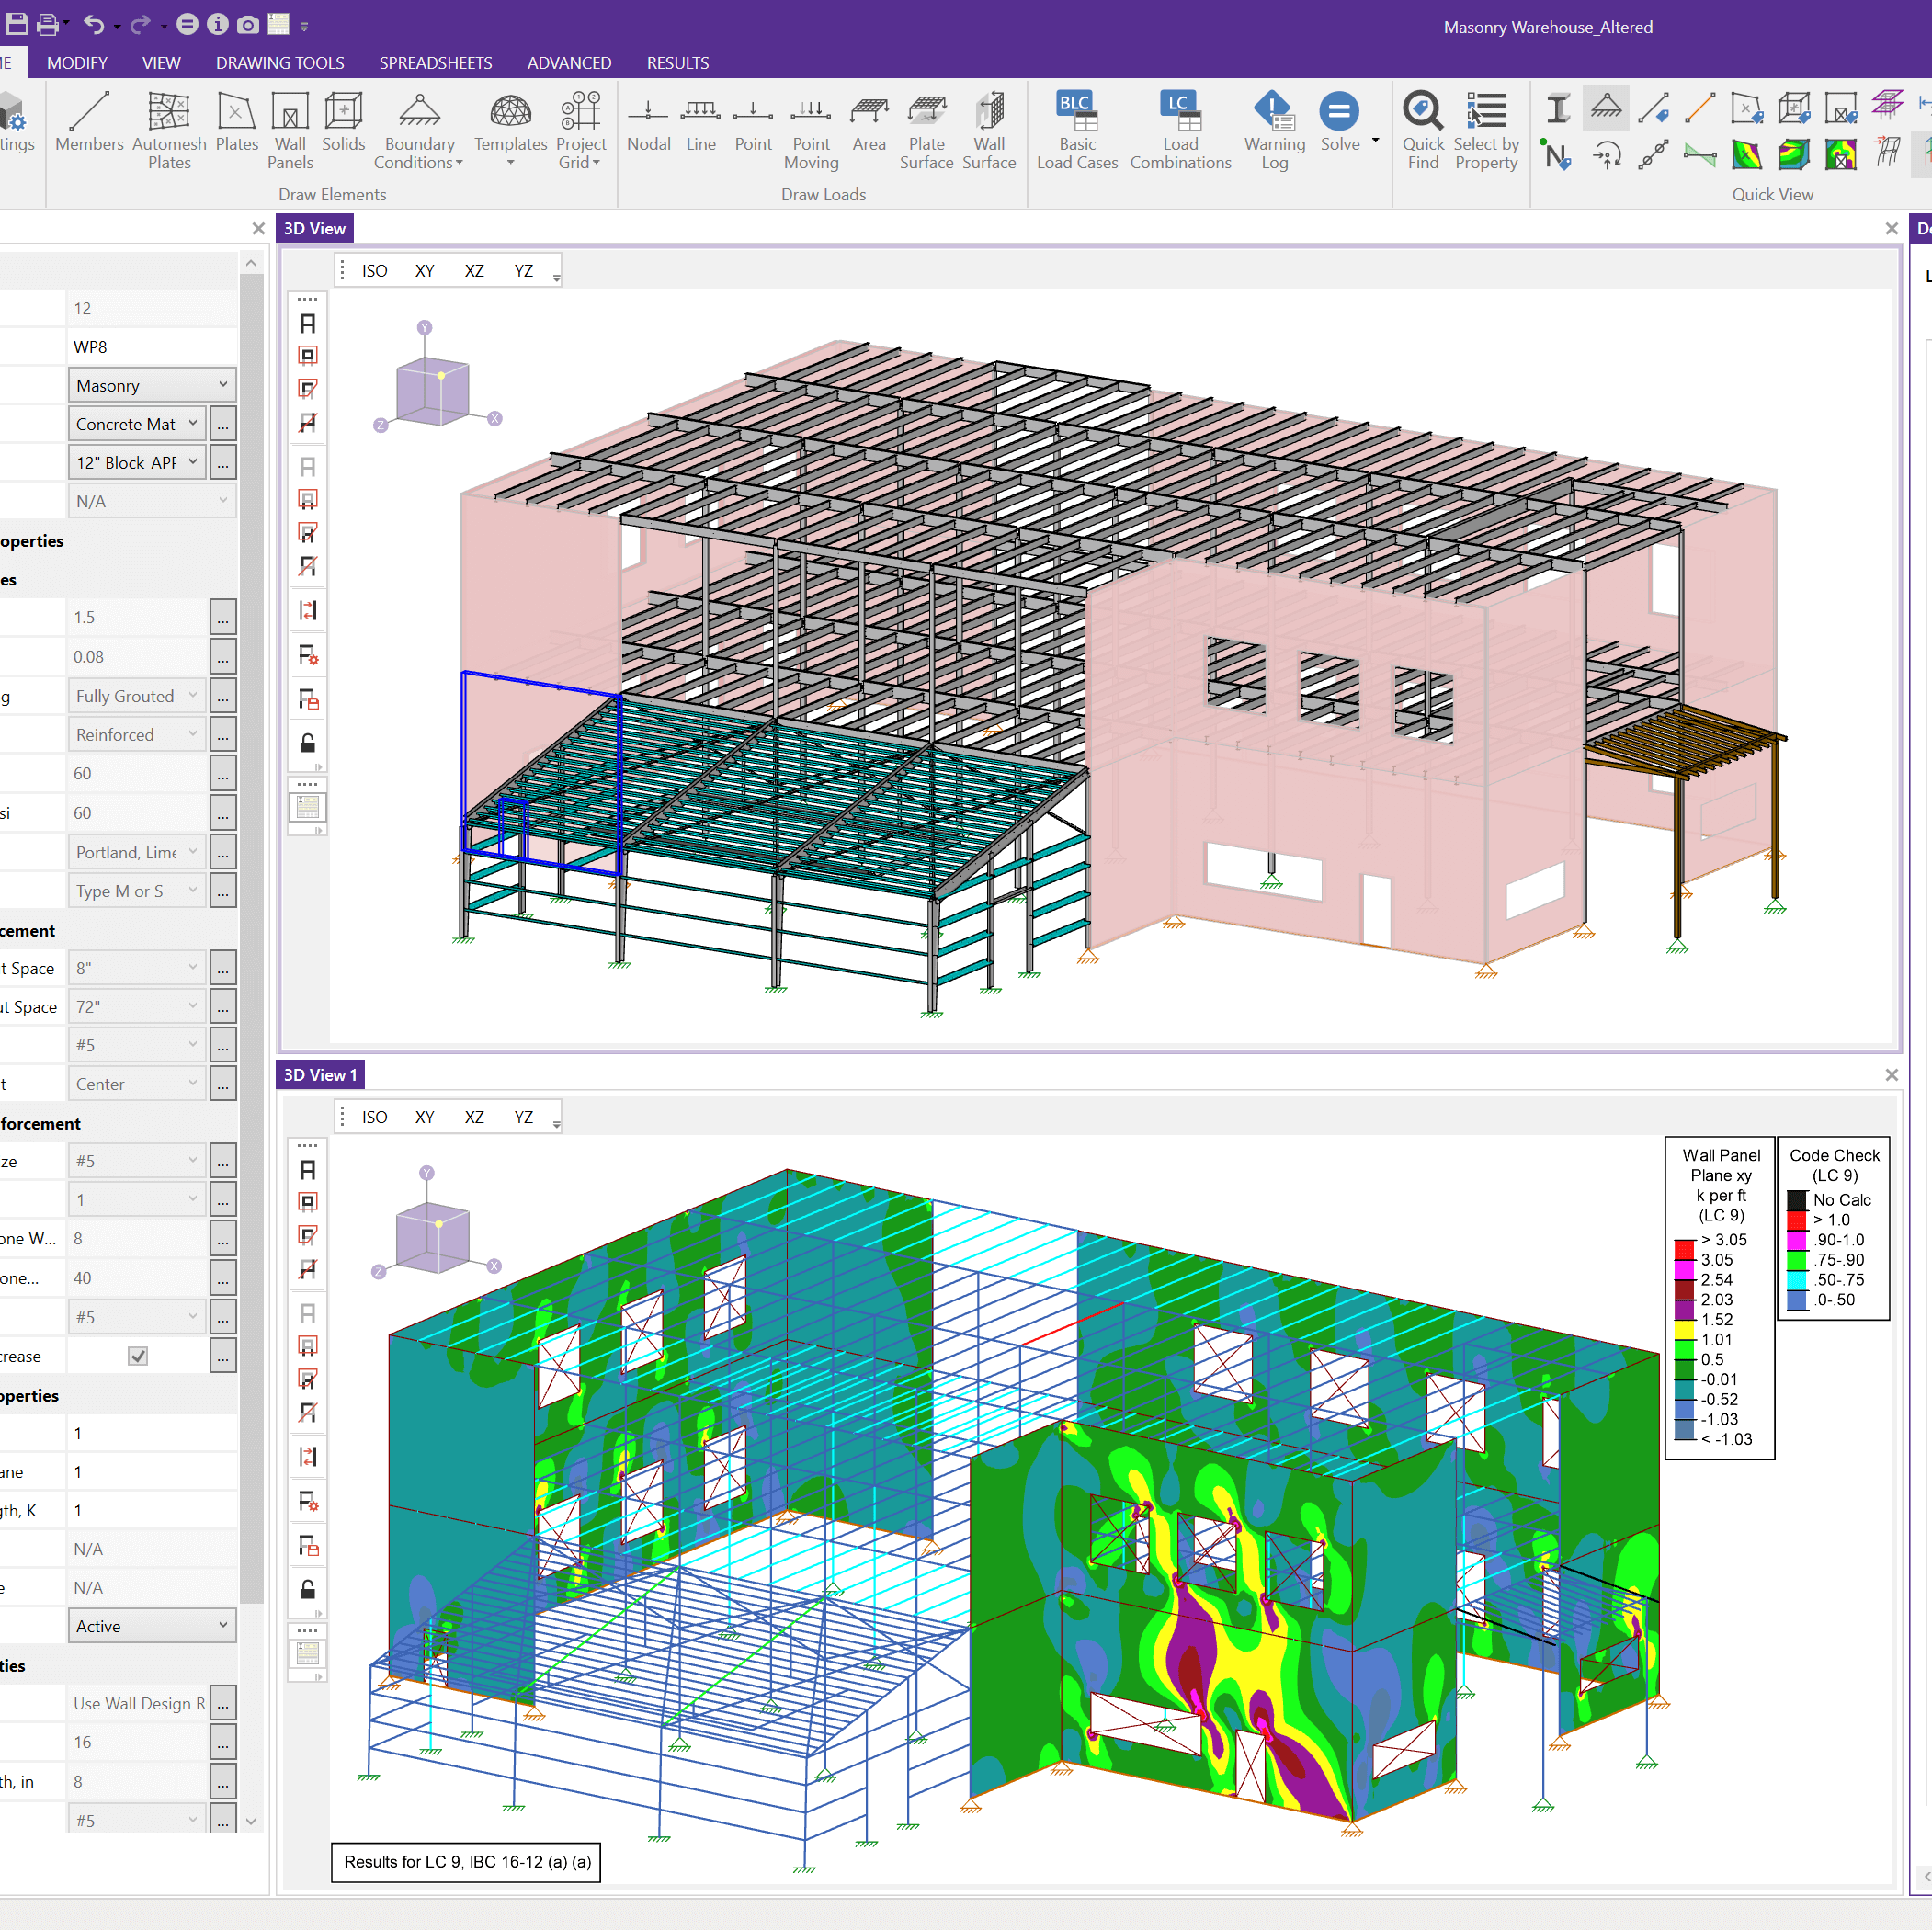 the main page of a digital modeling software program